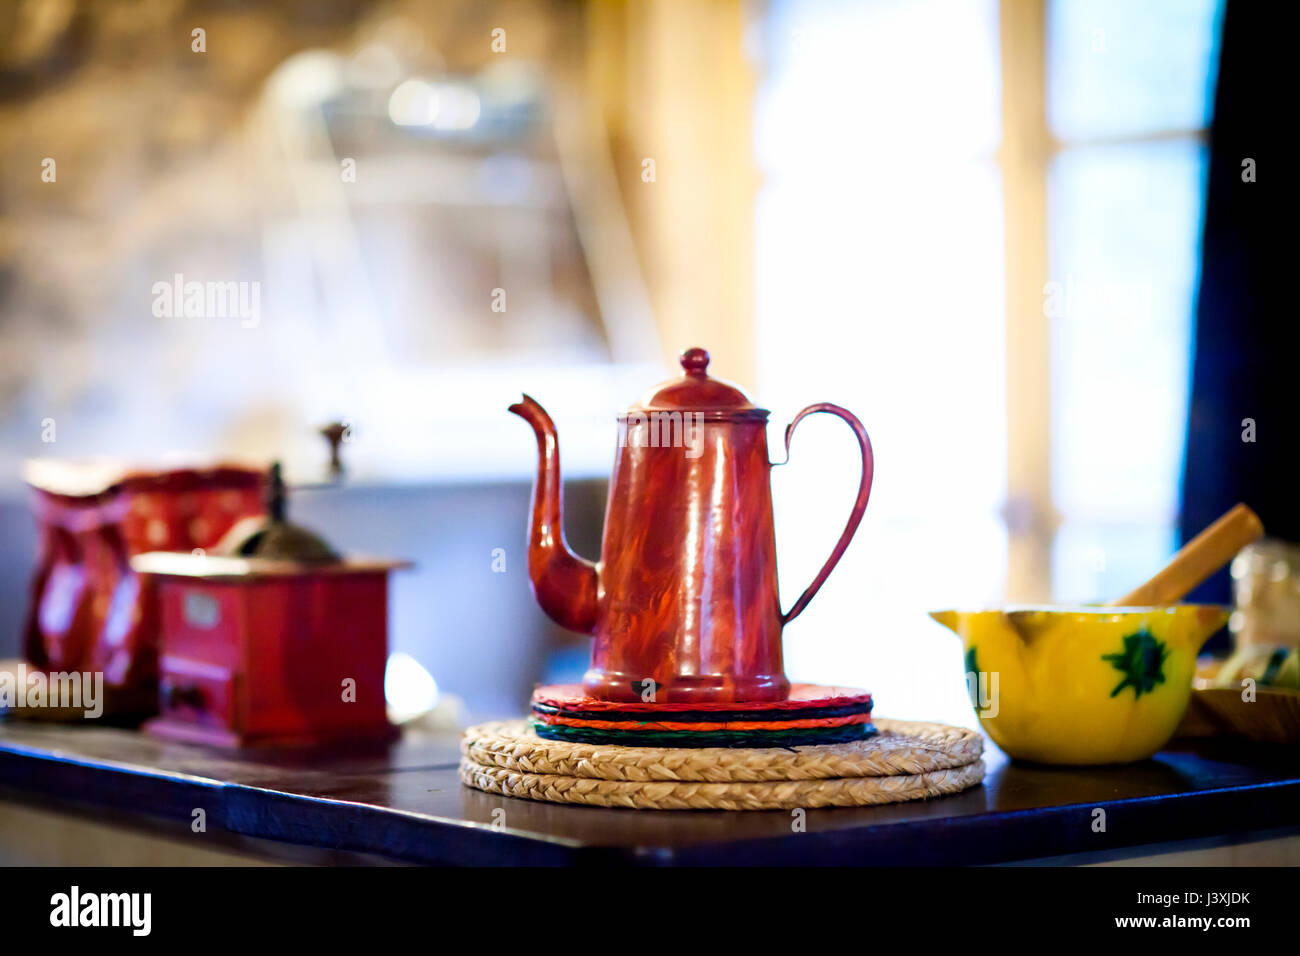 Traditional red coffee pot and coffee grinder on kitchen counter Stock Photo